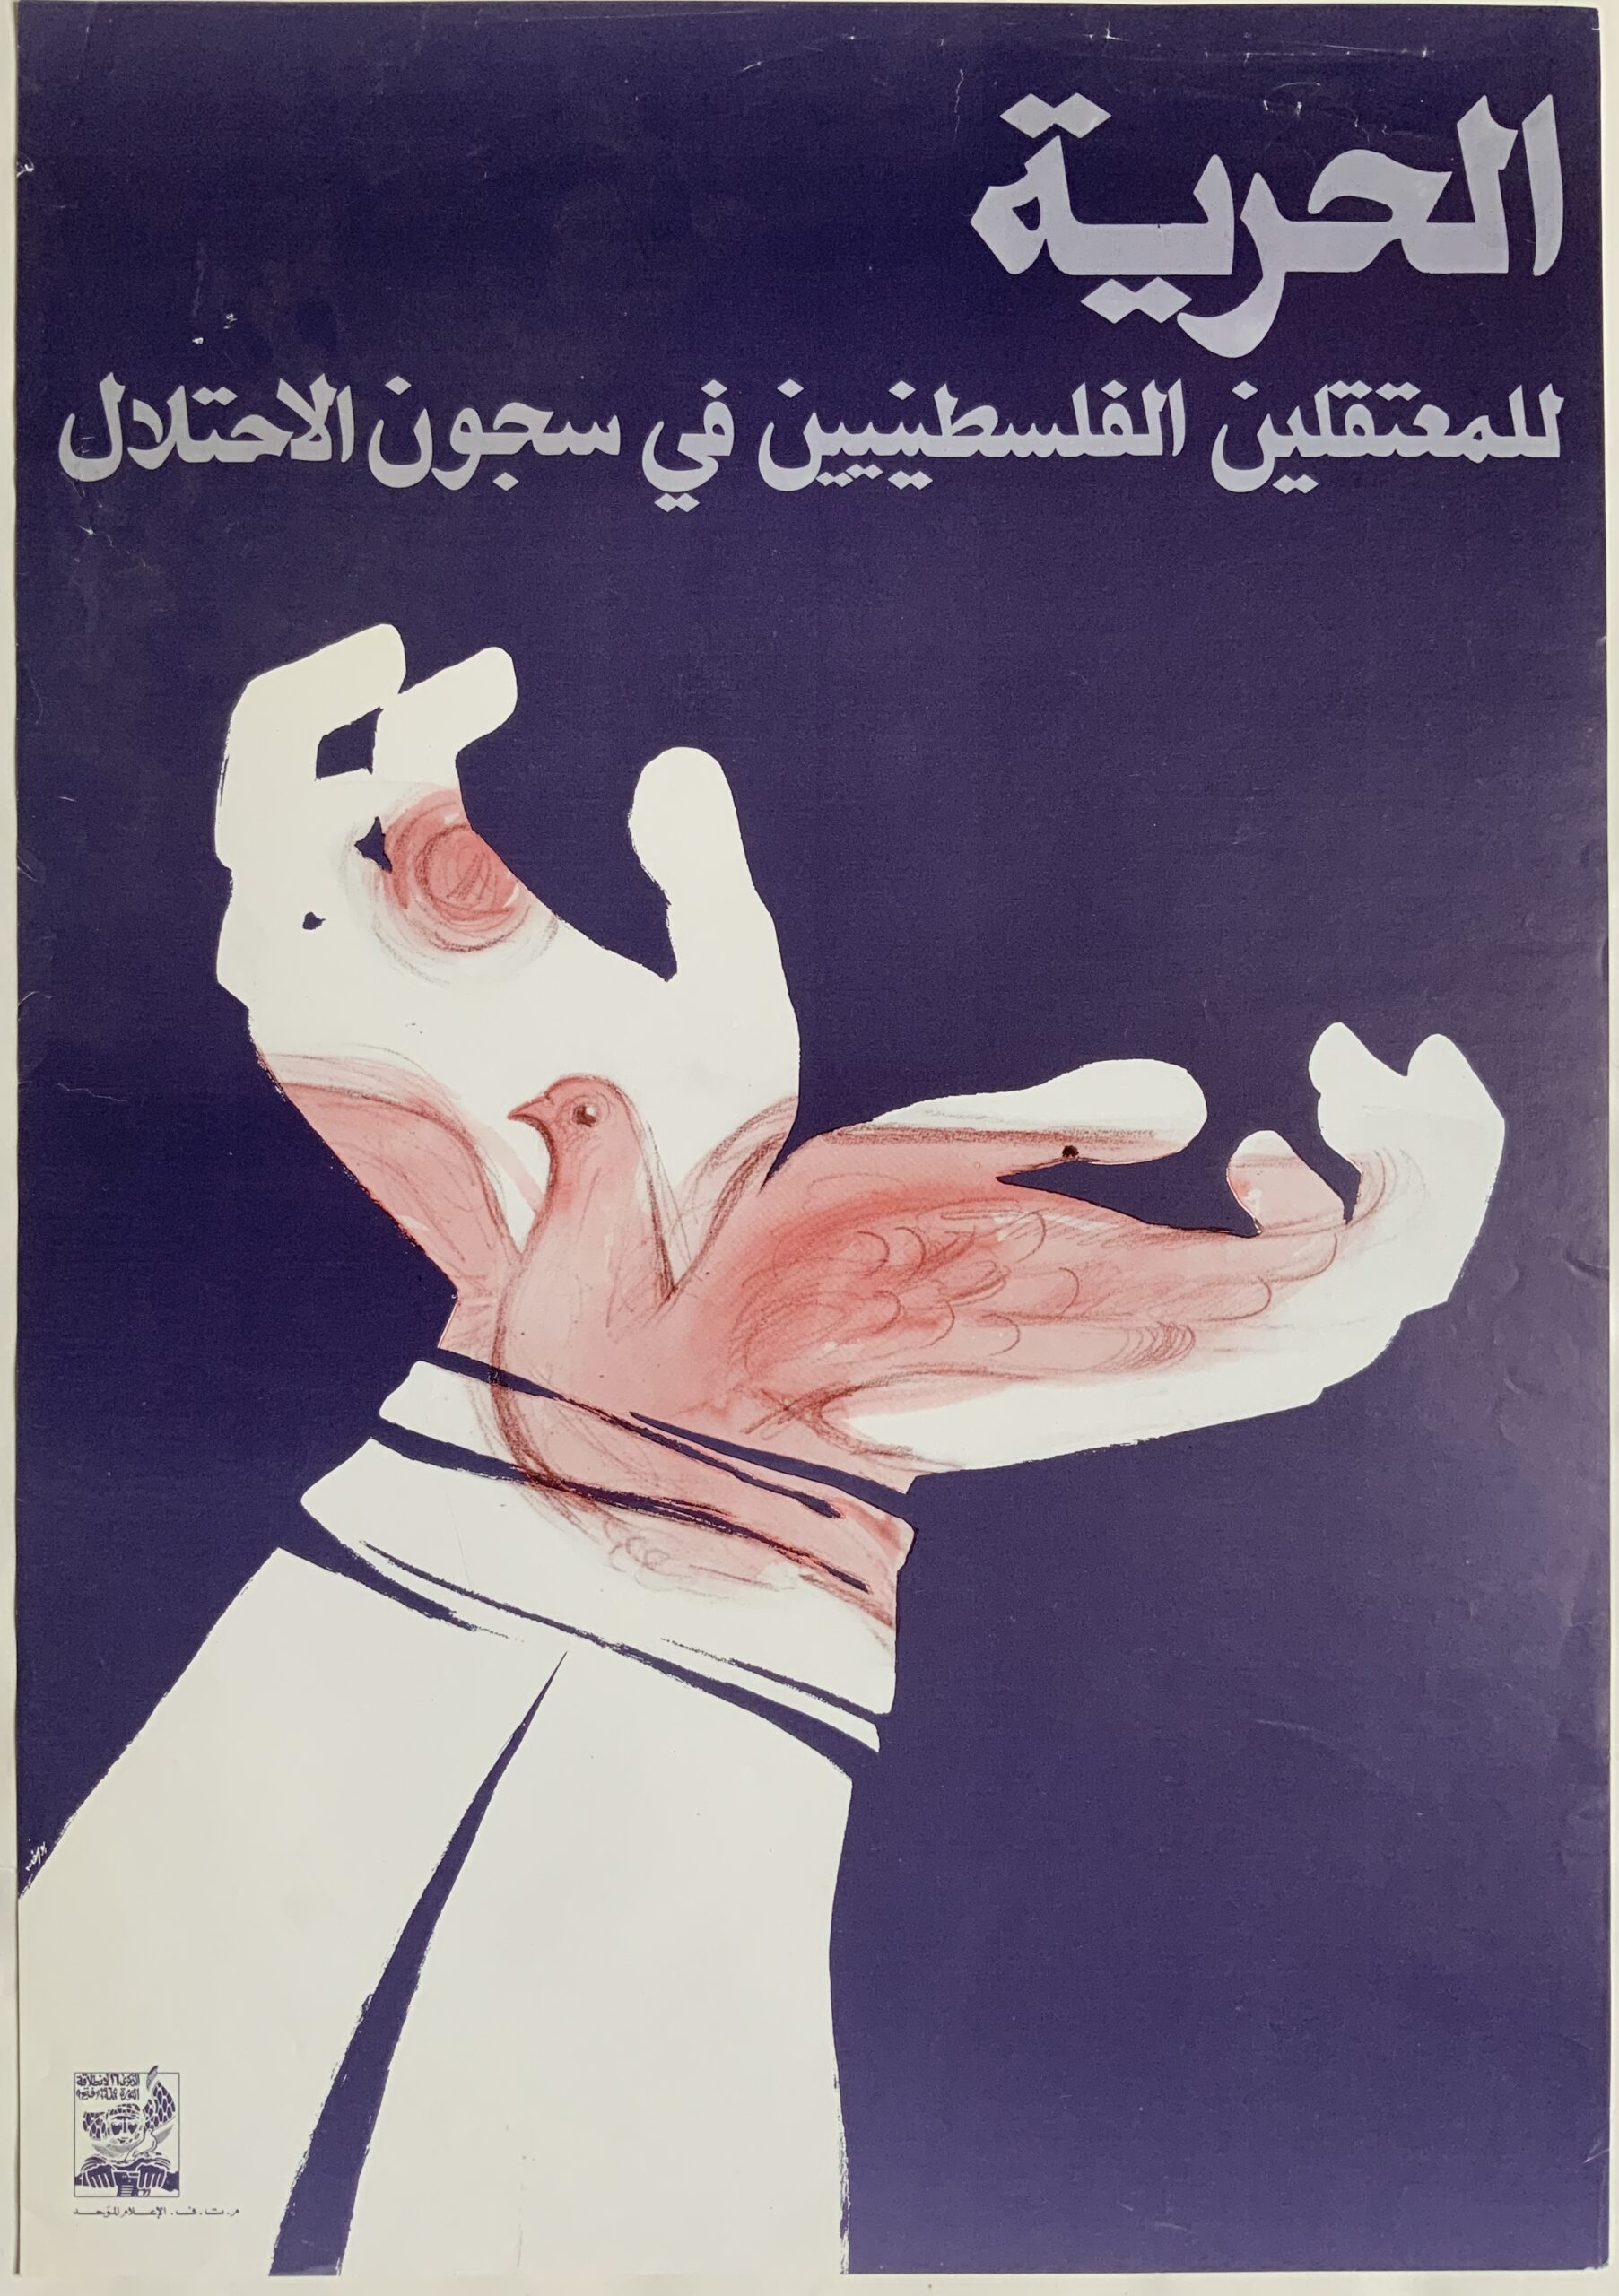 M386	DOVE OF PEACE (TITLE SUPPLIED) - PALESTINE	LIBERATION POSTER